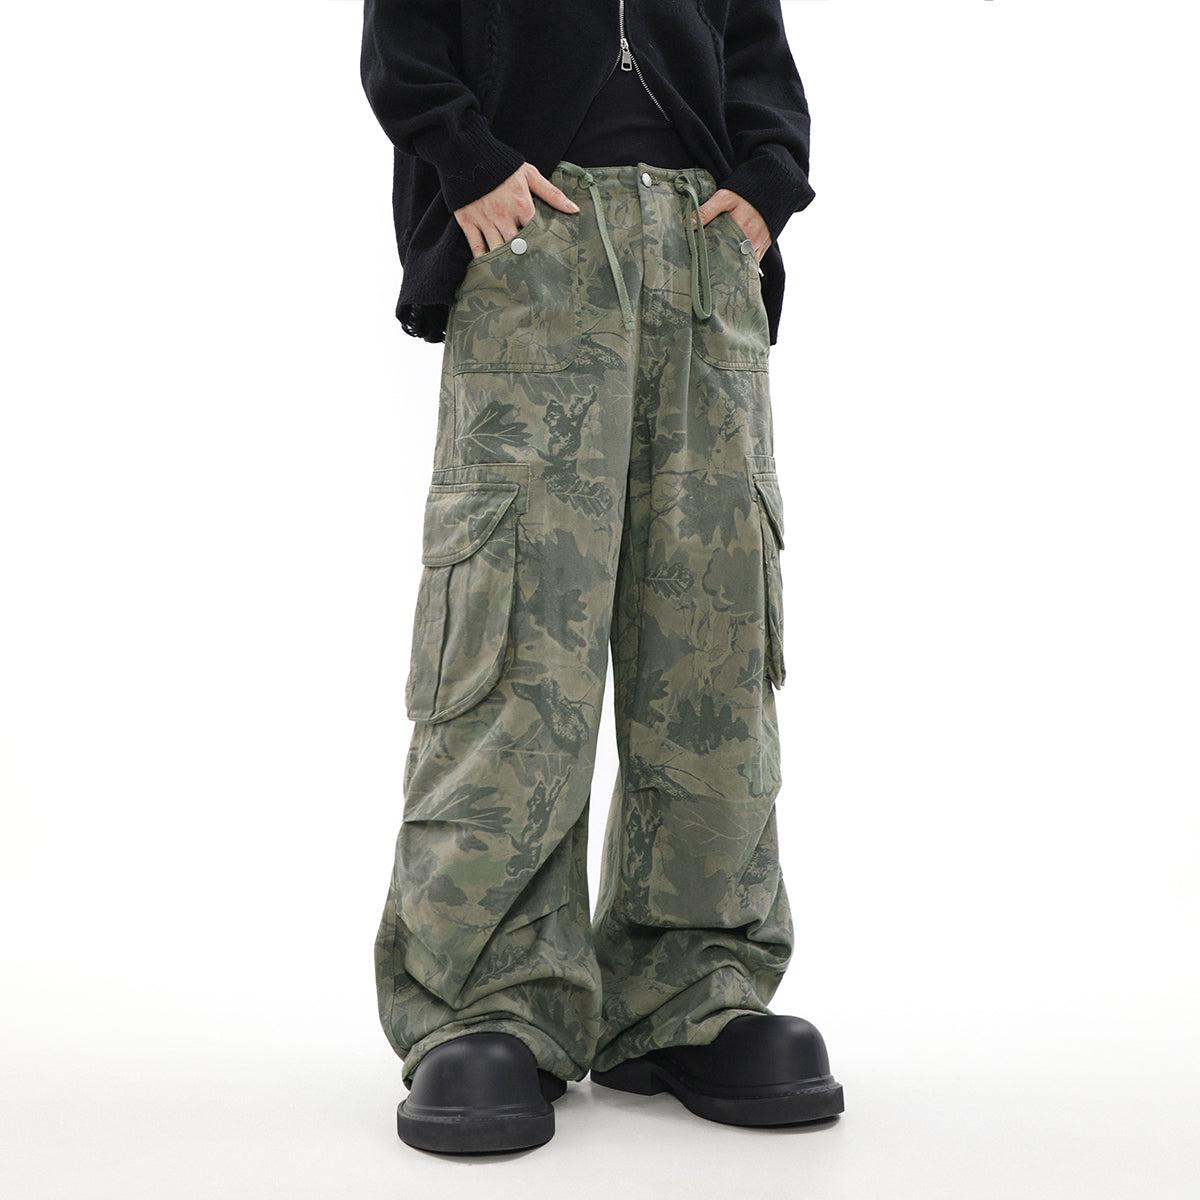 Mr Nearly Leaf Camouflage Drawstring Cargo Pants Korean Street Fashion Pants By Mr Nearly Shop Online at OH Vault